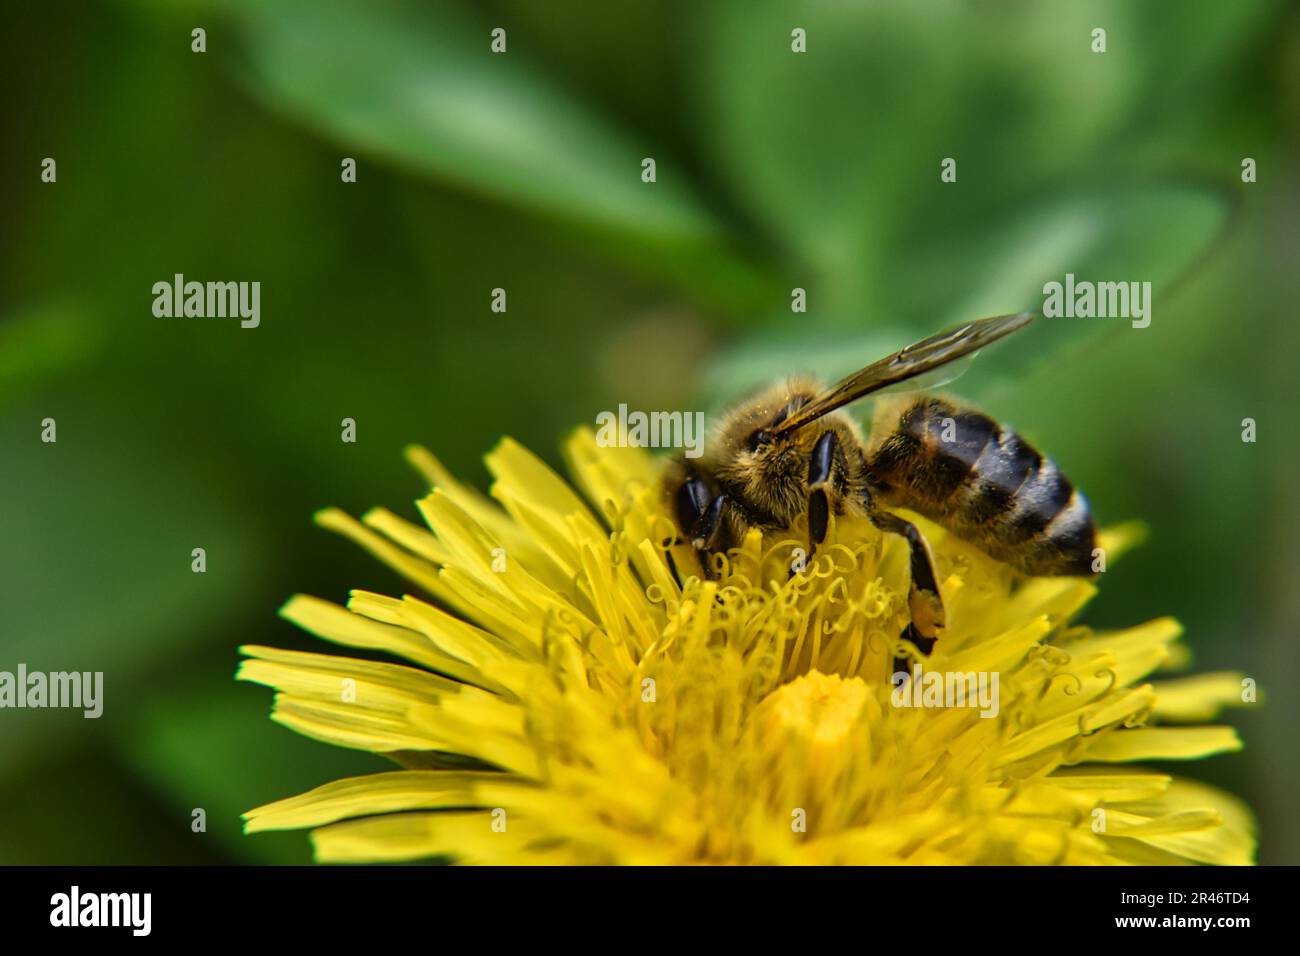 A closeup of bee sipping nectar from flower on blurred background Stock Photo